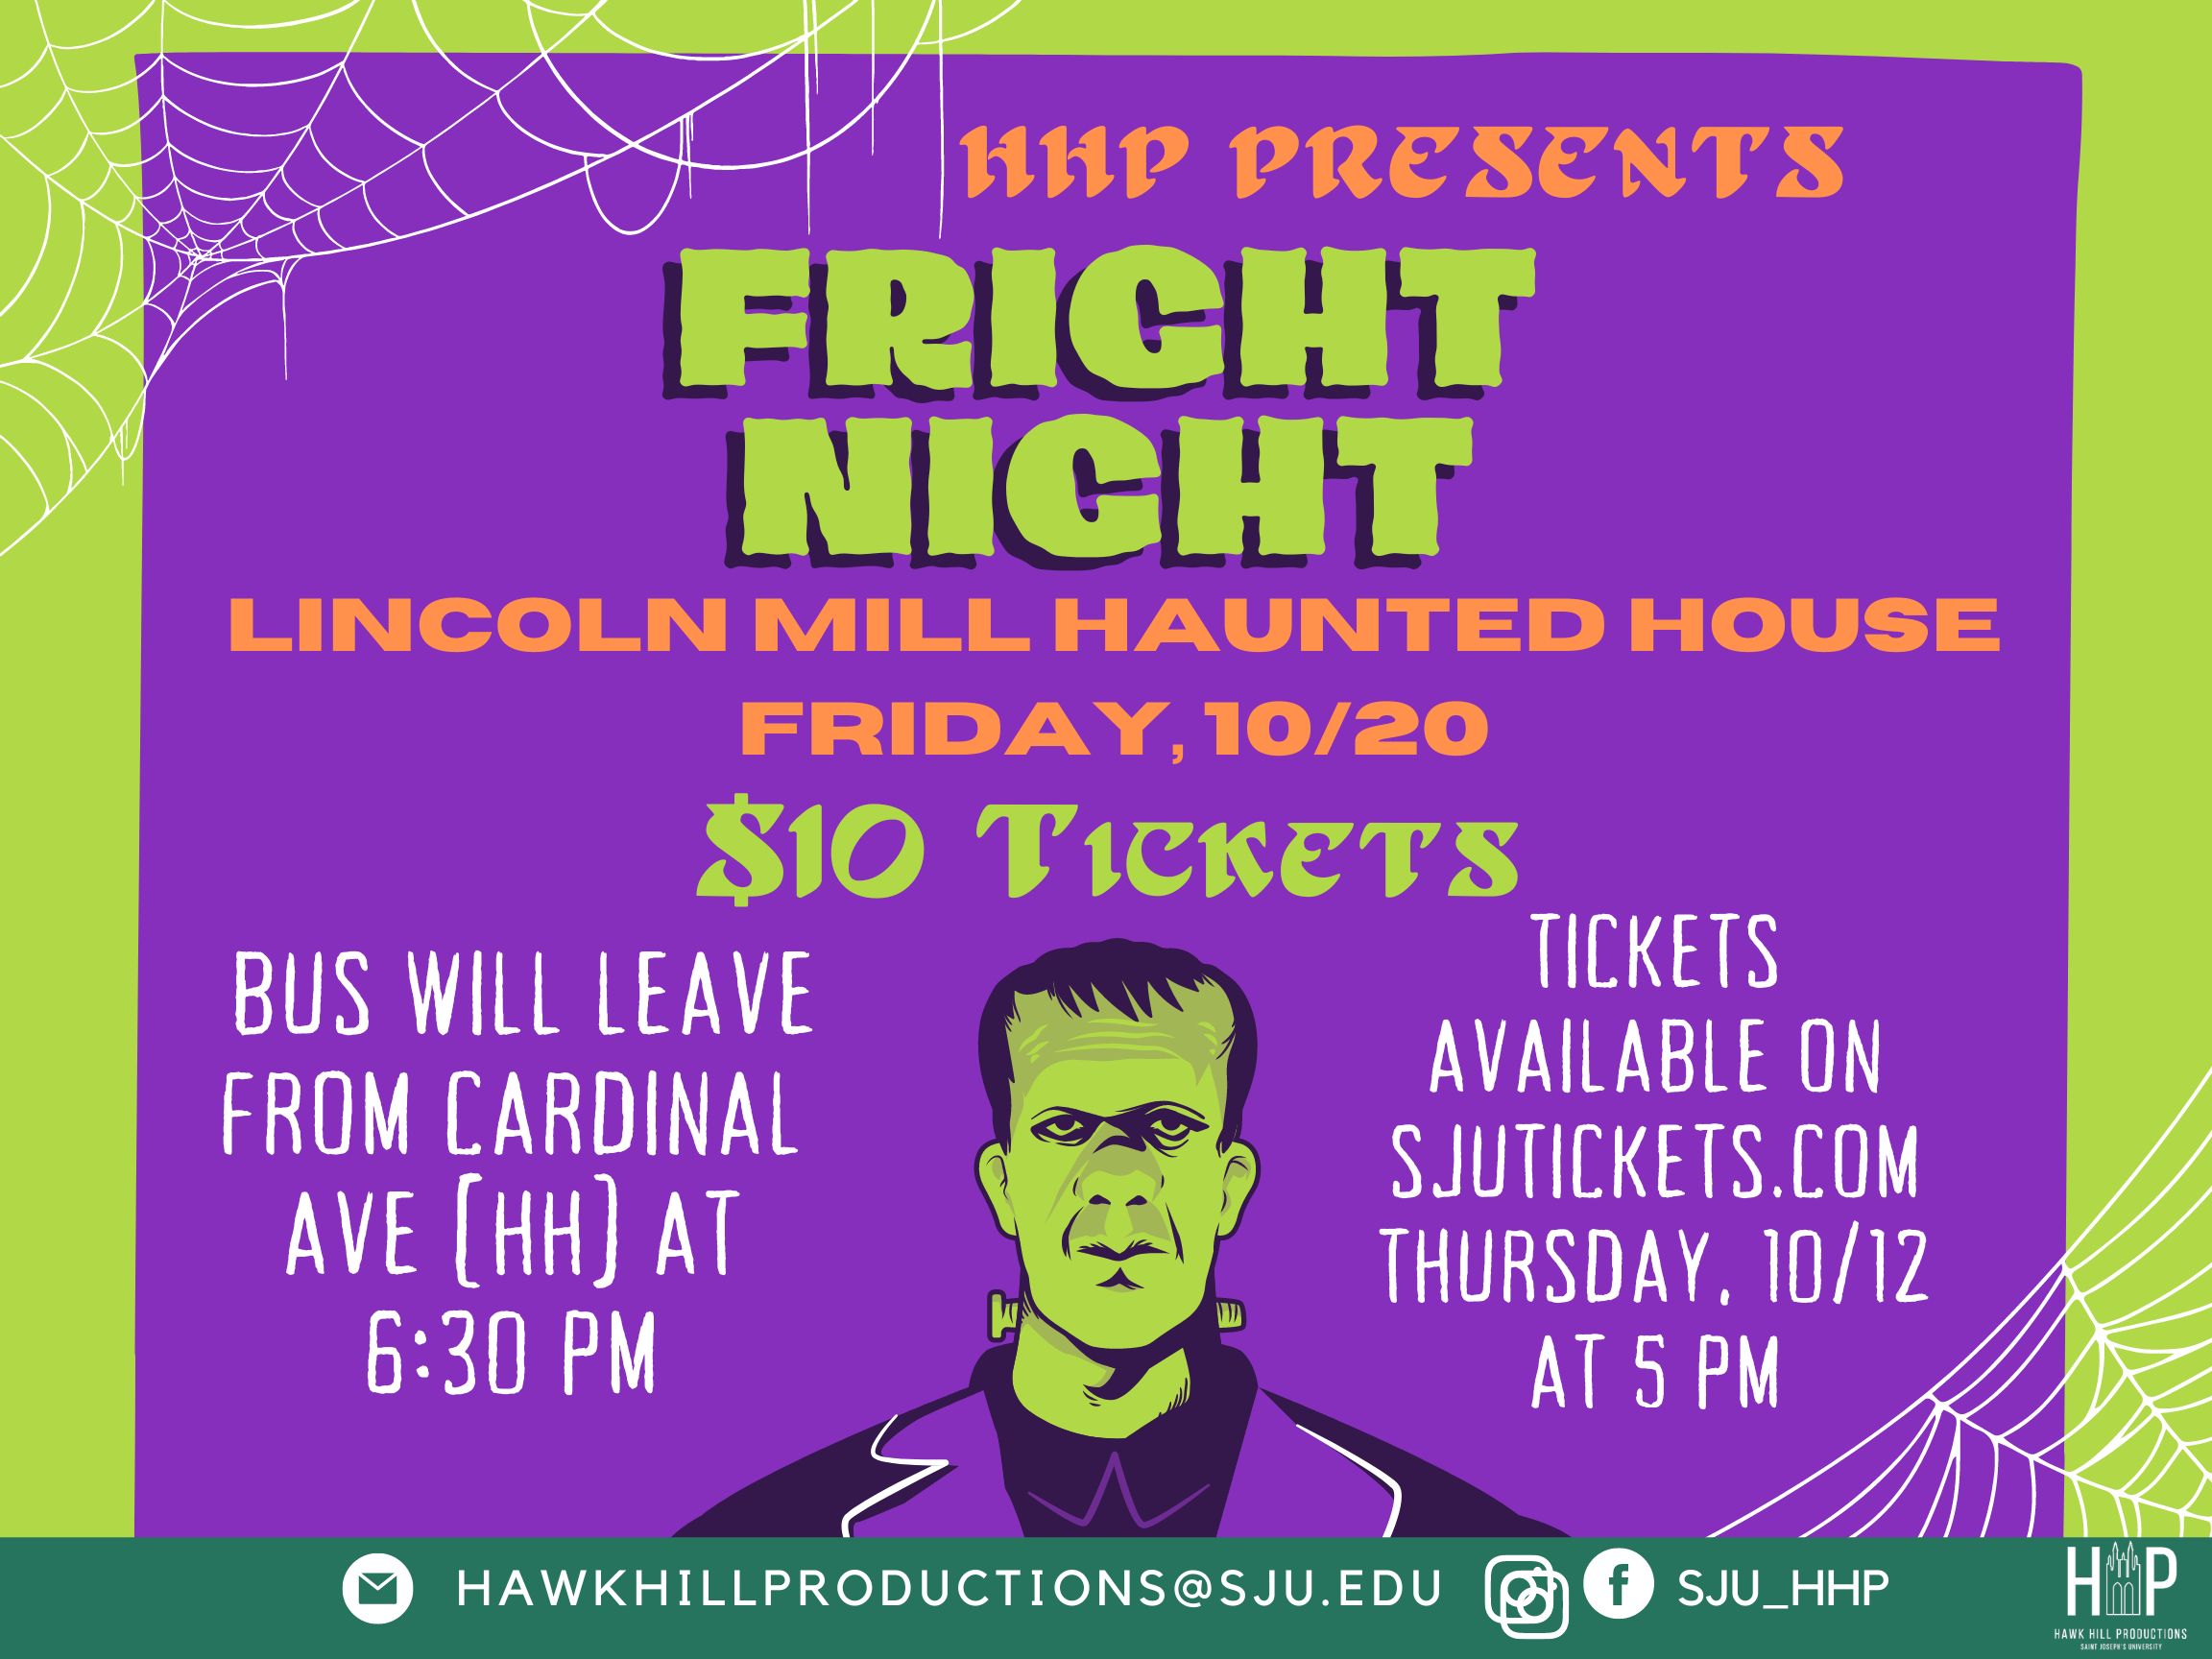 This image depicts a flyer for a halloween trip to a haunted house. The color scheme is green and purple and there is a cartoon frankenstein in the center of the flyer with text around it.